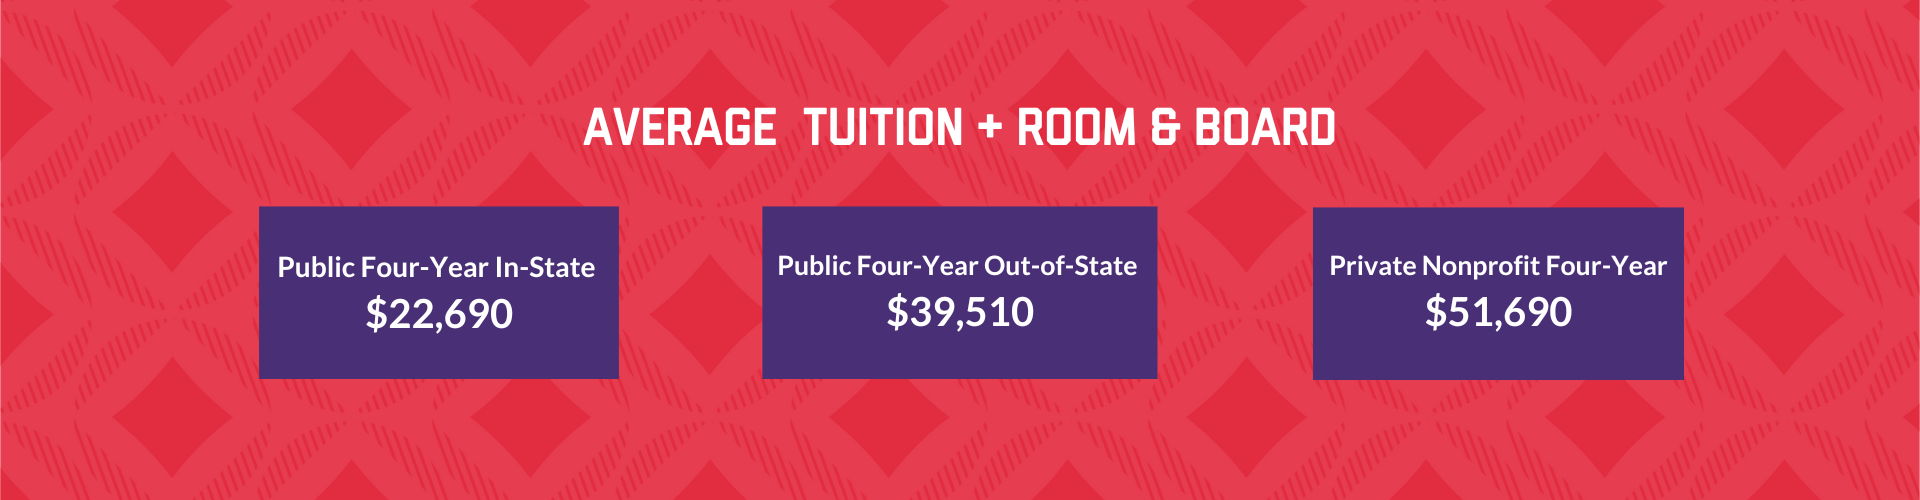 Tuition Stats 2021